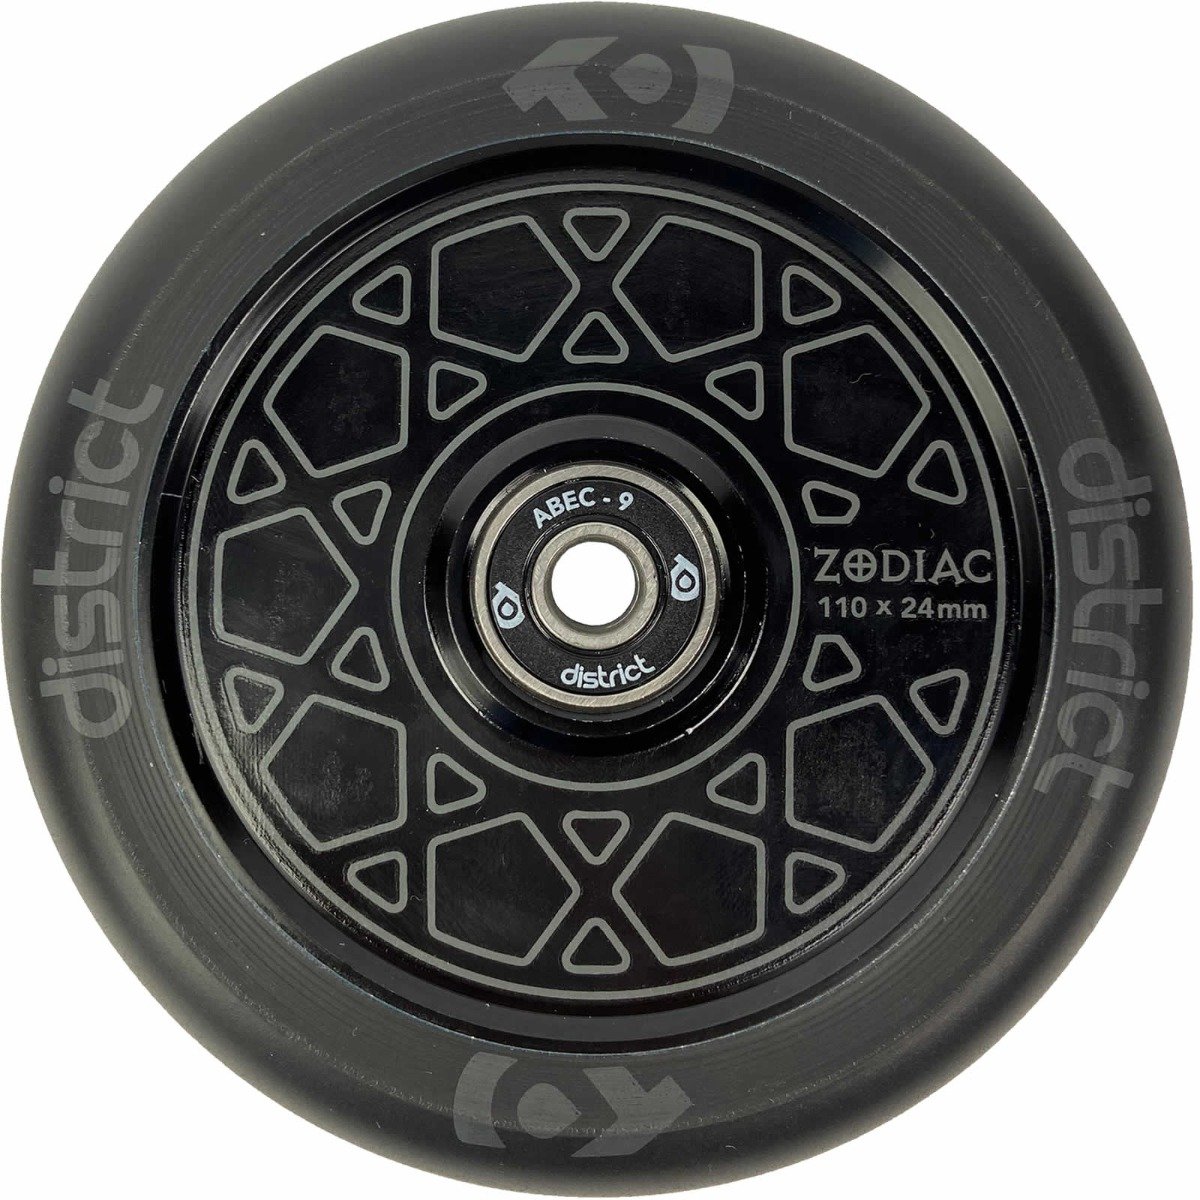 An image of District Zodiac Black Stunt Scooter Wheels - 110mm